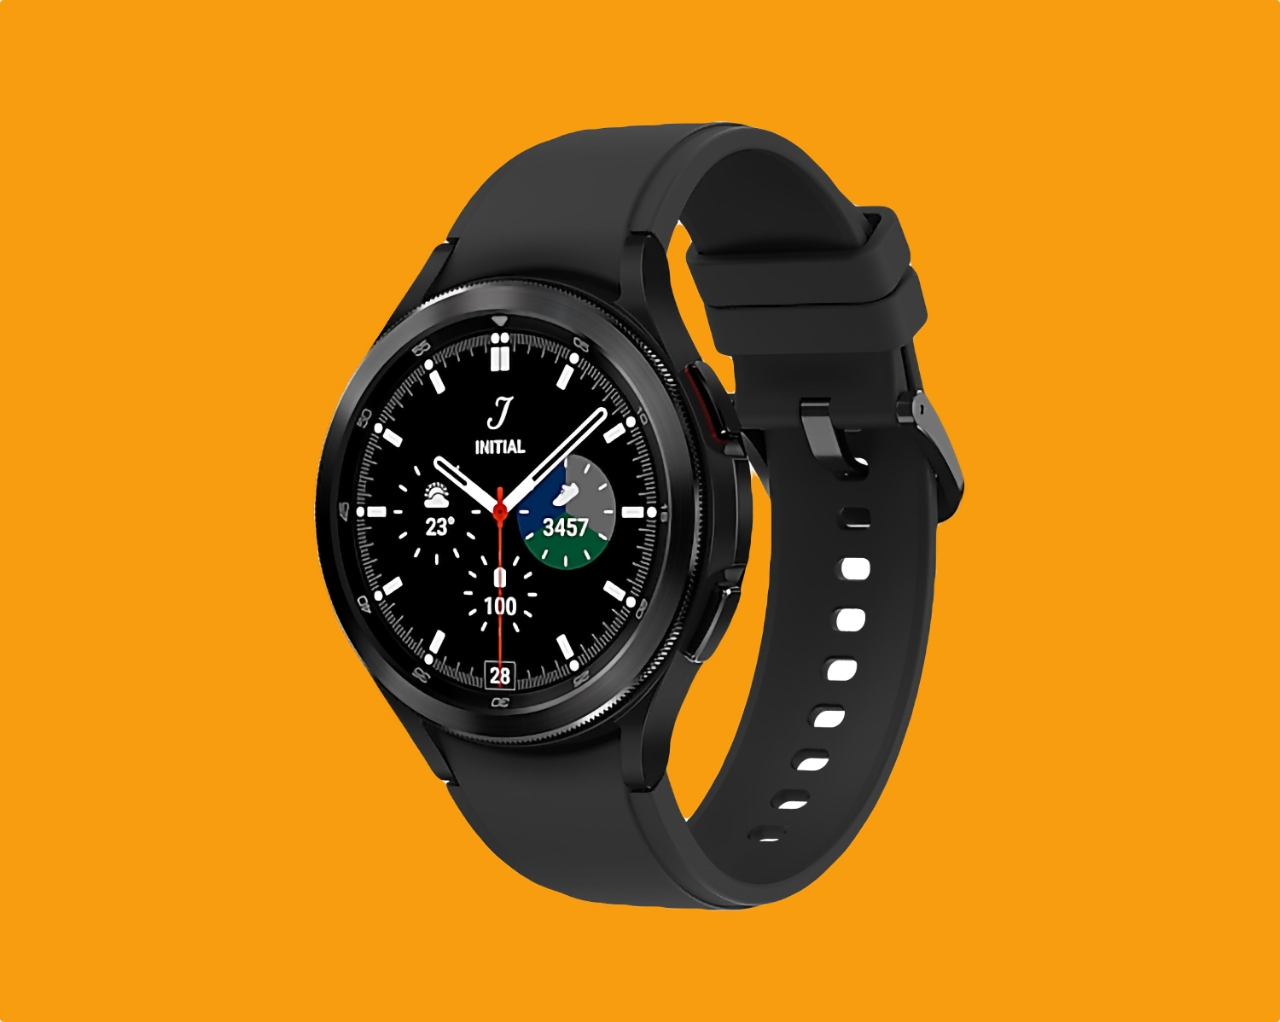 Samsung Galaxy Watch 4 Classic with ECG sensor, IP68 protection and Wear OS on board is on Amazon with $151 discount